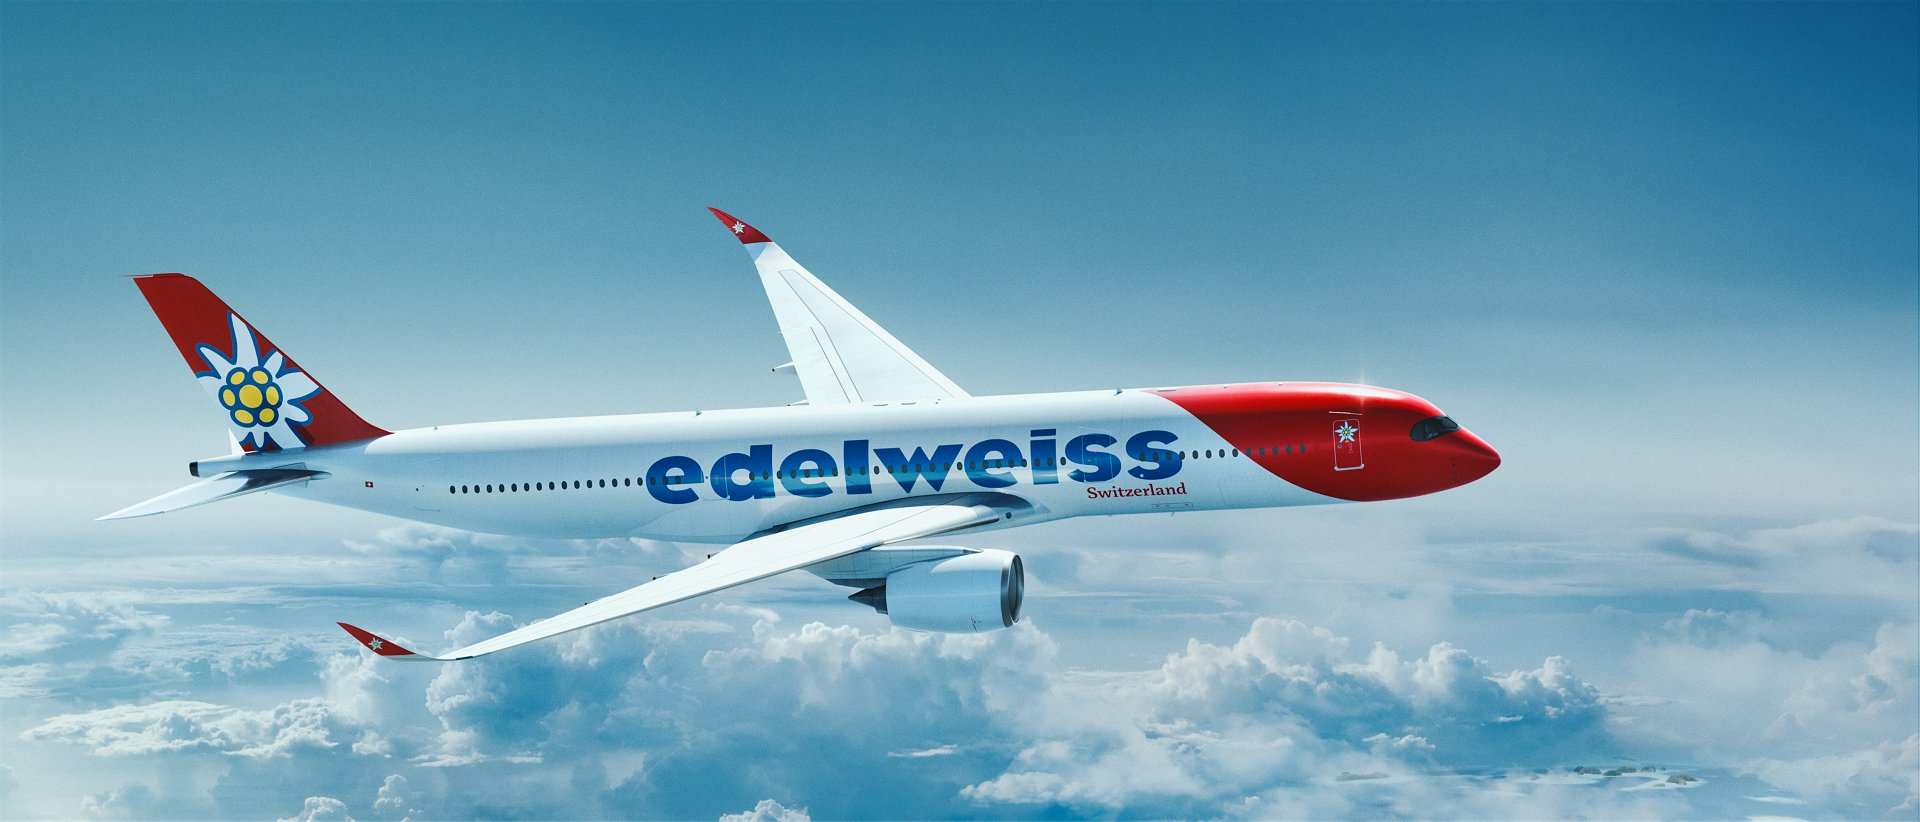 Swiss  leisure  airline  Edelweiss  will  Procure  LATAM's  Airbus A350-900  to  Phase out Its  A340-300  long-haul Fleet.